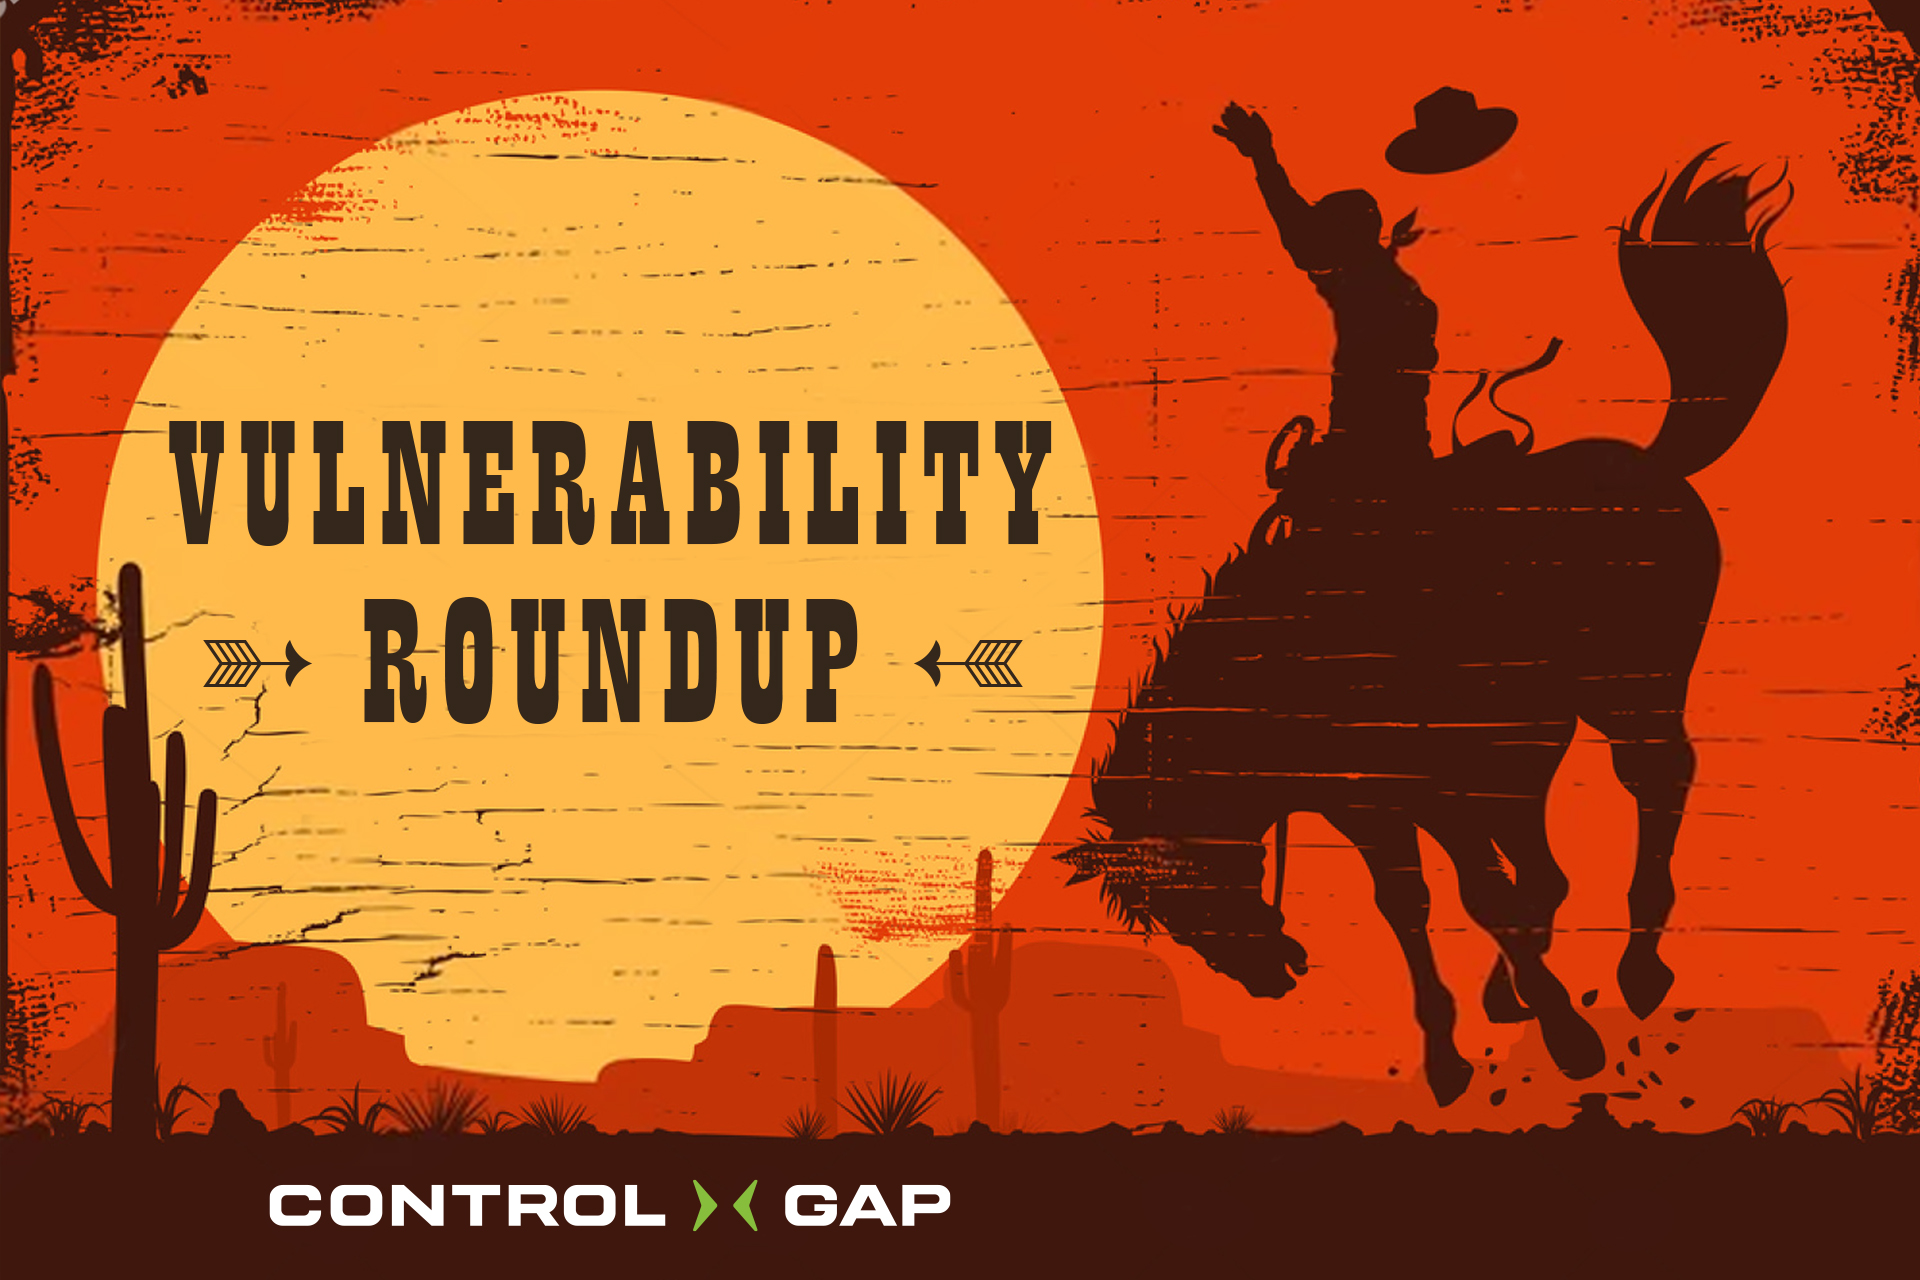 Control Gap Vulnerability Roundup: February 18th to February 24th